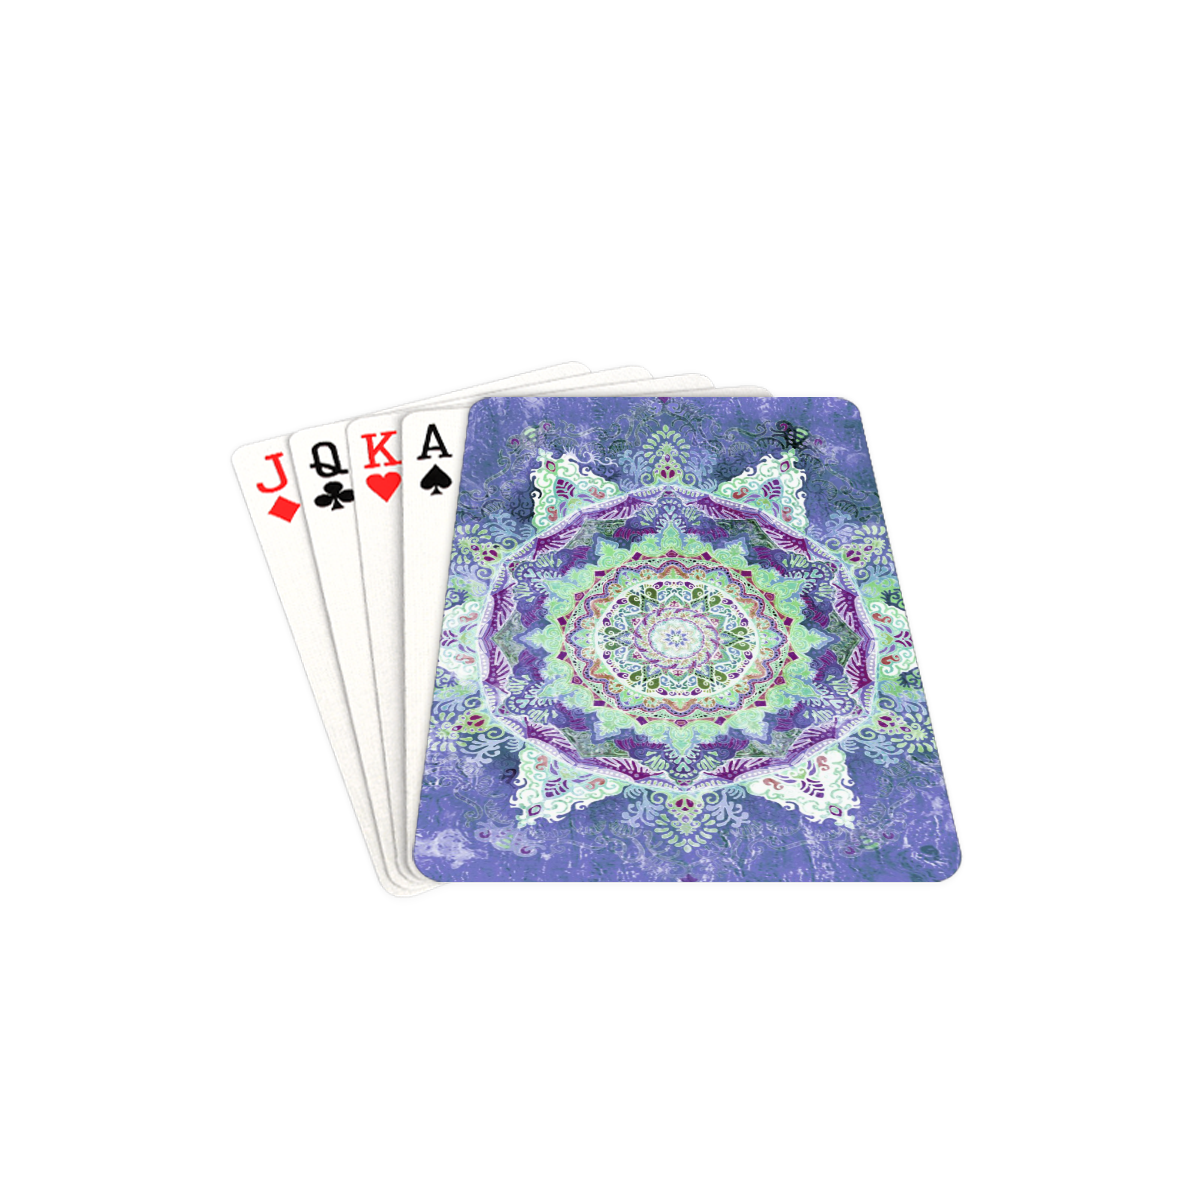 India 19 Playing Cards 2.5"x3.5"